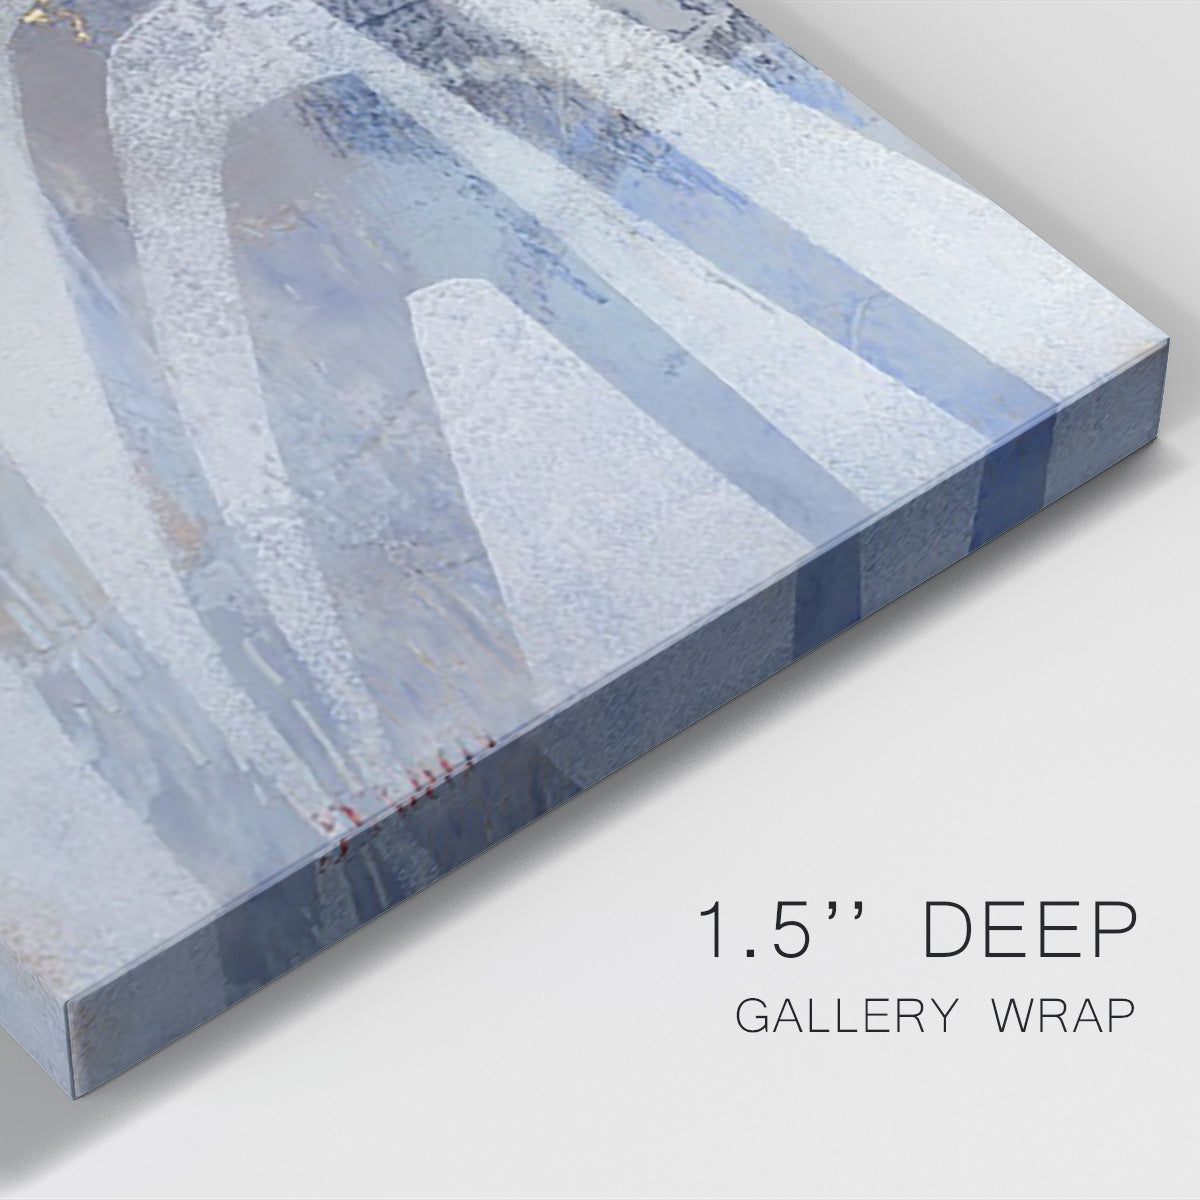 Linx IV Premium Gallery Wrapped Canvas - Ready to Hang